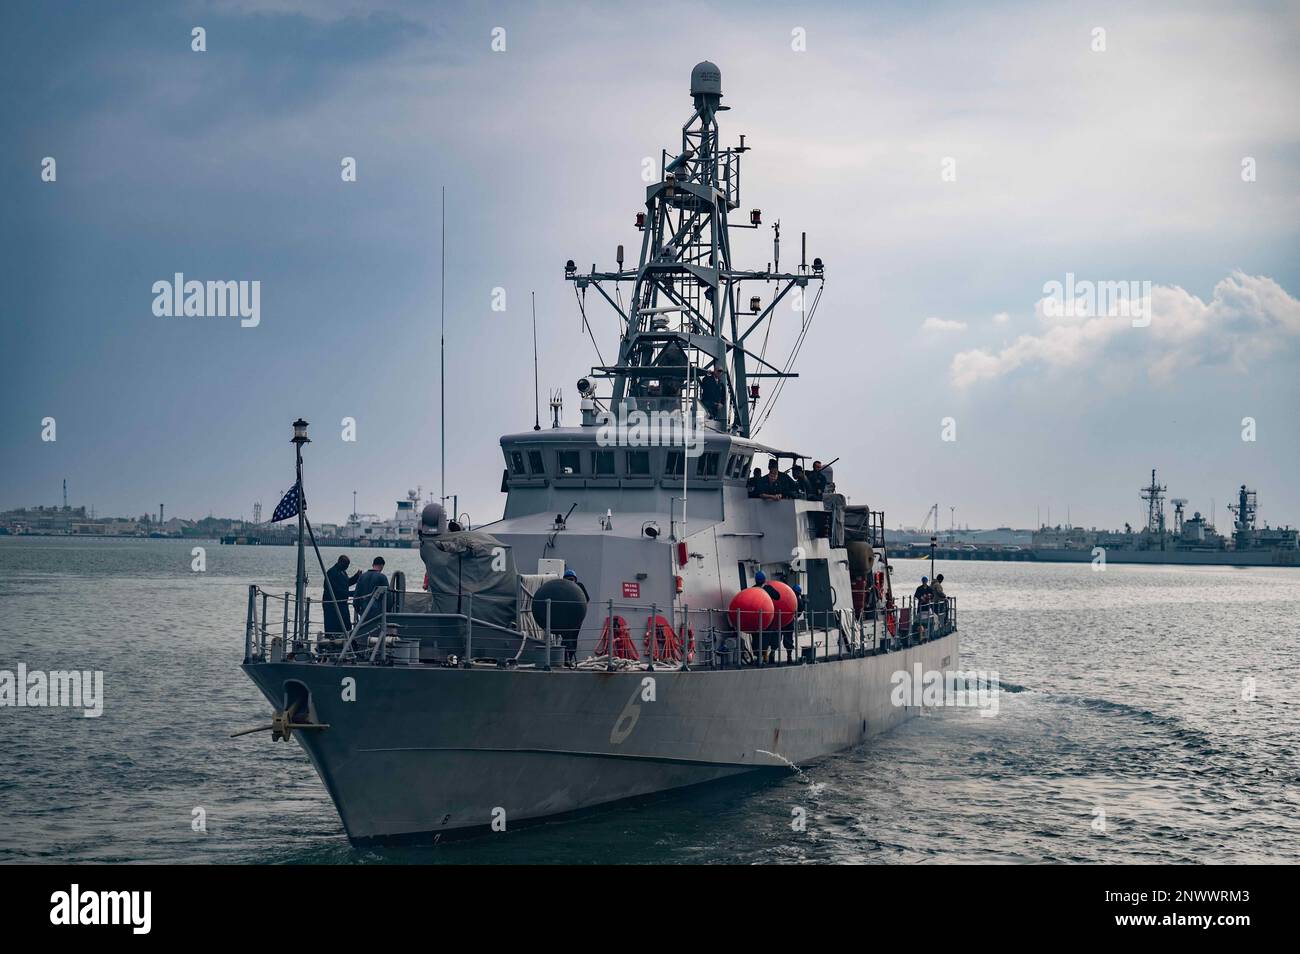 230114-N-EG592-1090 MANAMA, Bahrain (Jan. 14, 2023) Patrol coastal ship USS Sirocco (PC 6) departs Naval Support Activity Bahrain, Jan. 14. Sirocco is deployed to the U.S. 5th Fleet area of operations to help ensure maritime security and stability in the Middle East region. Stock Photo